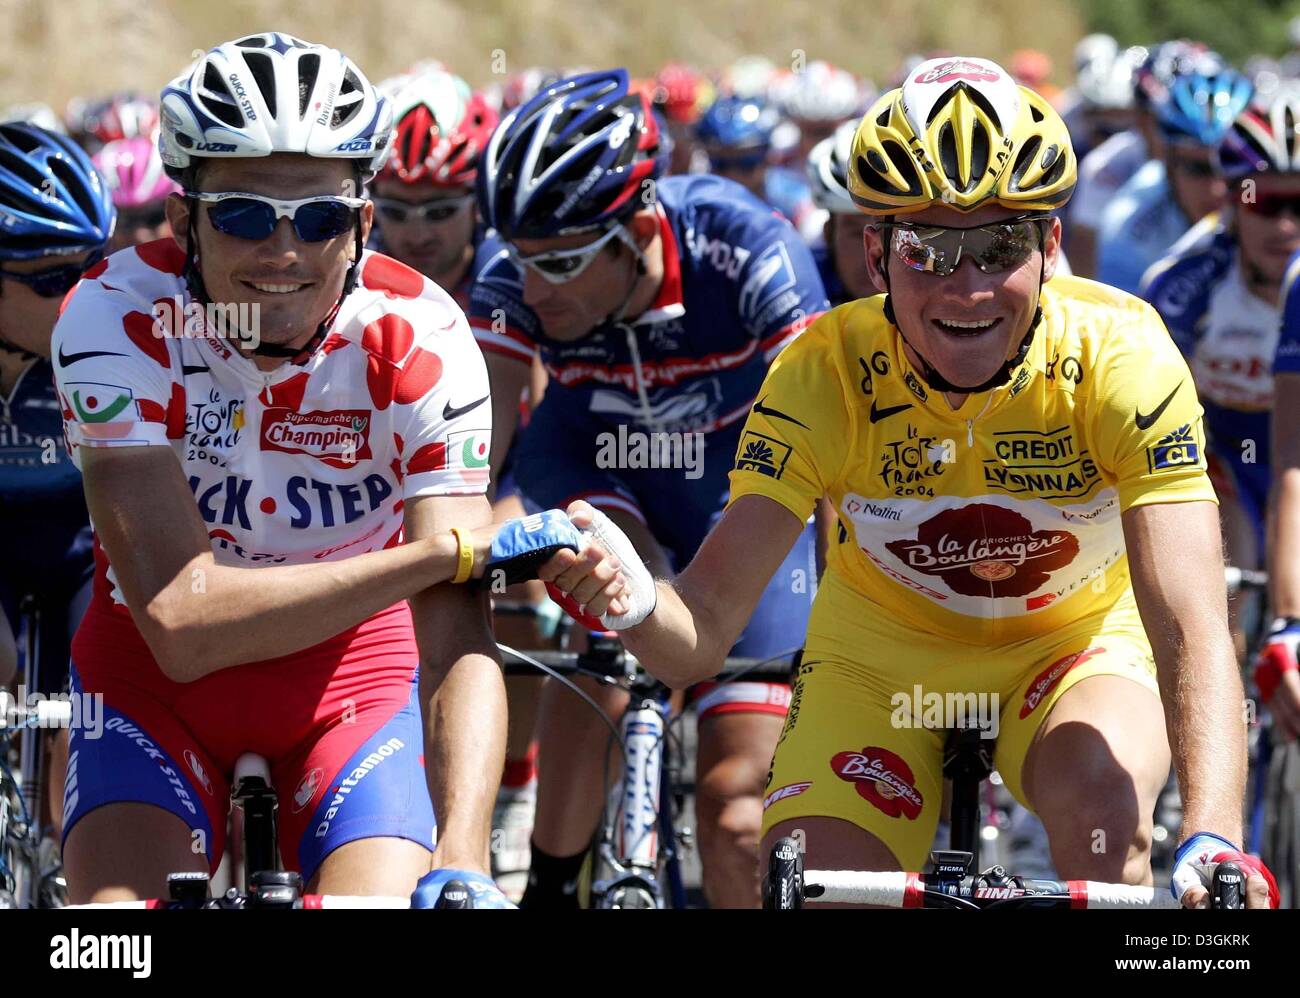 (dpa) - French cyclists Thomas Voeckler of team Brioches La Boulangere, wearing the yellow jersey of the overall leader, and Richard Virenque of team Quick Step-Davitamon, wearing the polka-dotted jersey of the best climber, await the start of the 11th stage of the Tour de France cycling race in Saint-Flour, France, 15 July 2004. The 164km long stage leads the cyclists from Saint-F Stock Photo